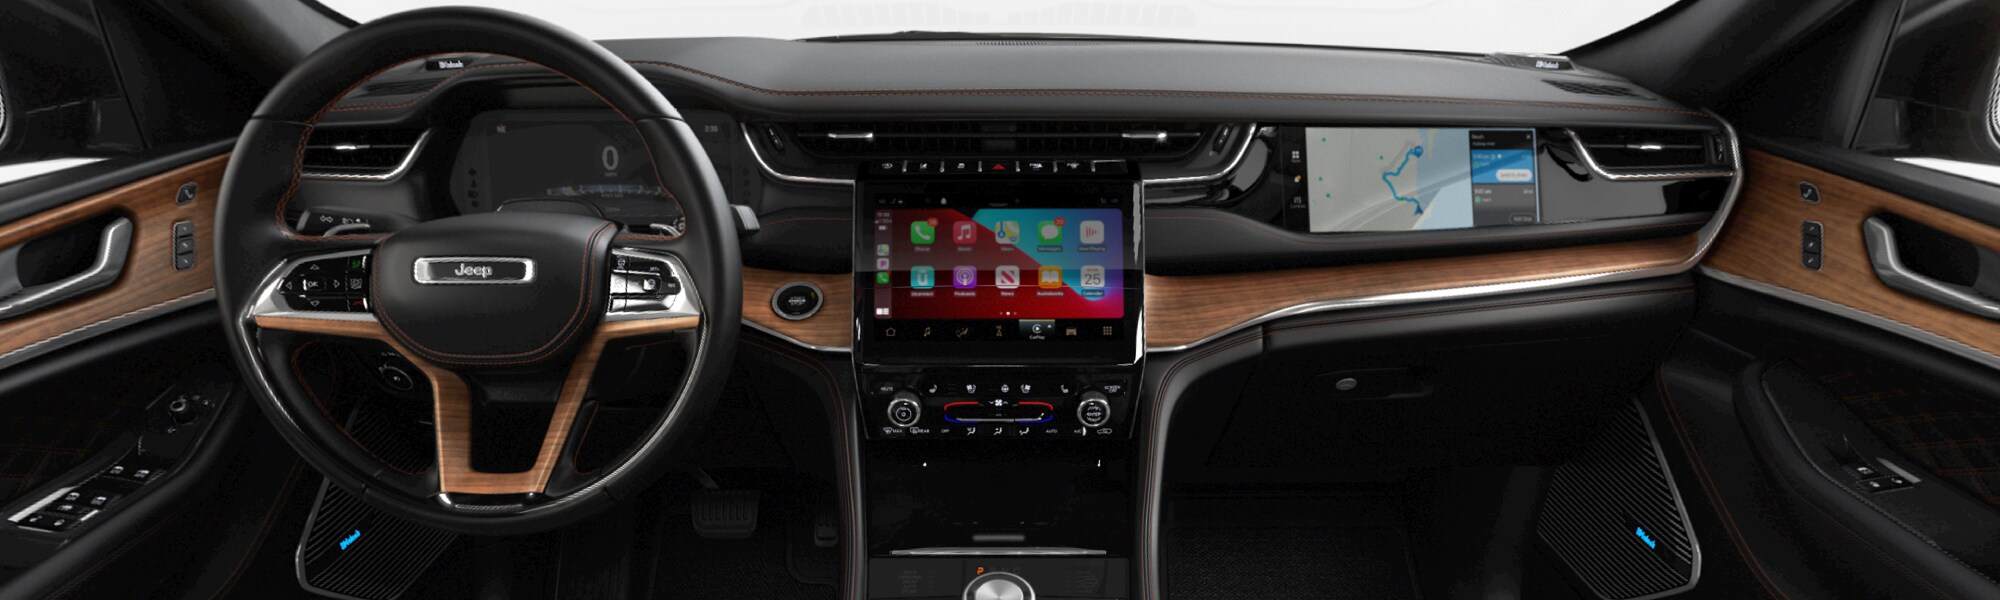 New Jeep Grand Cherokee interior Features